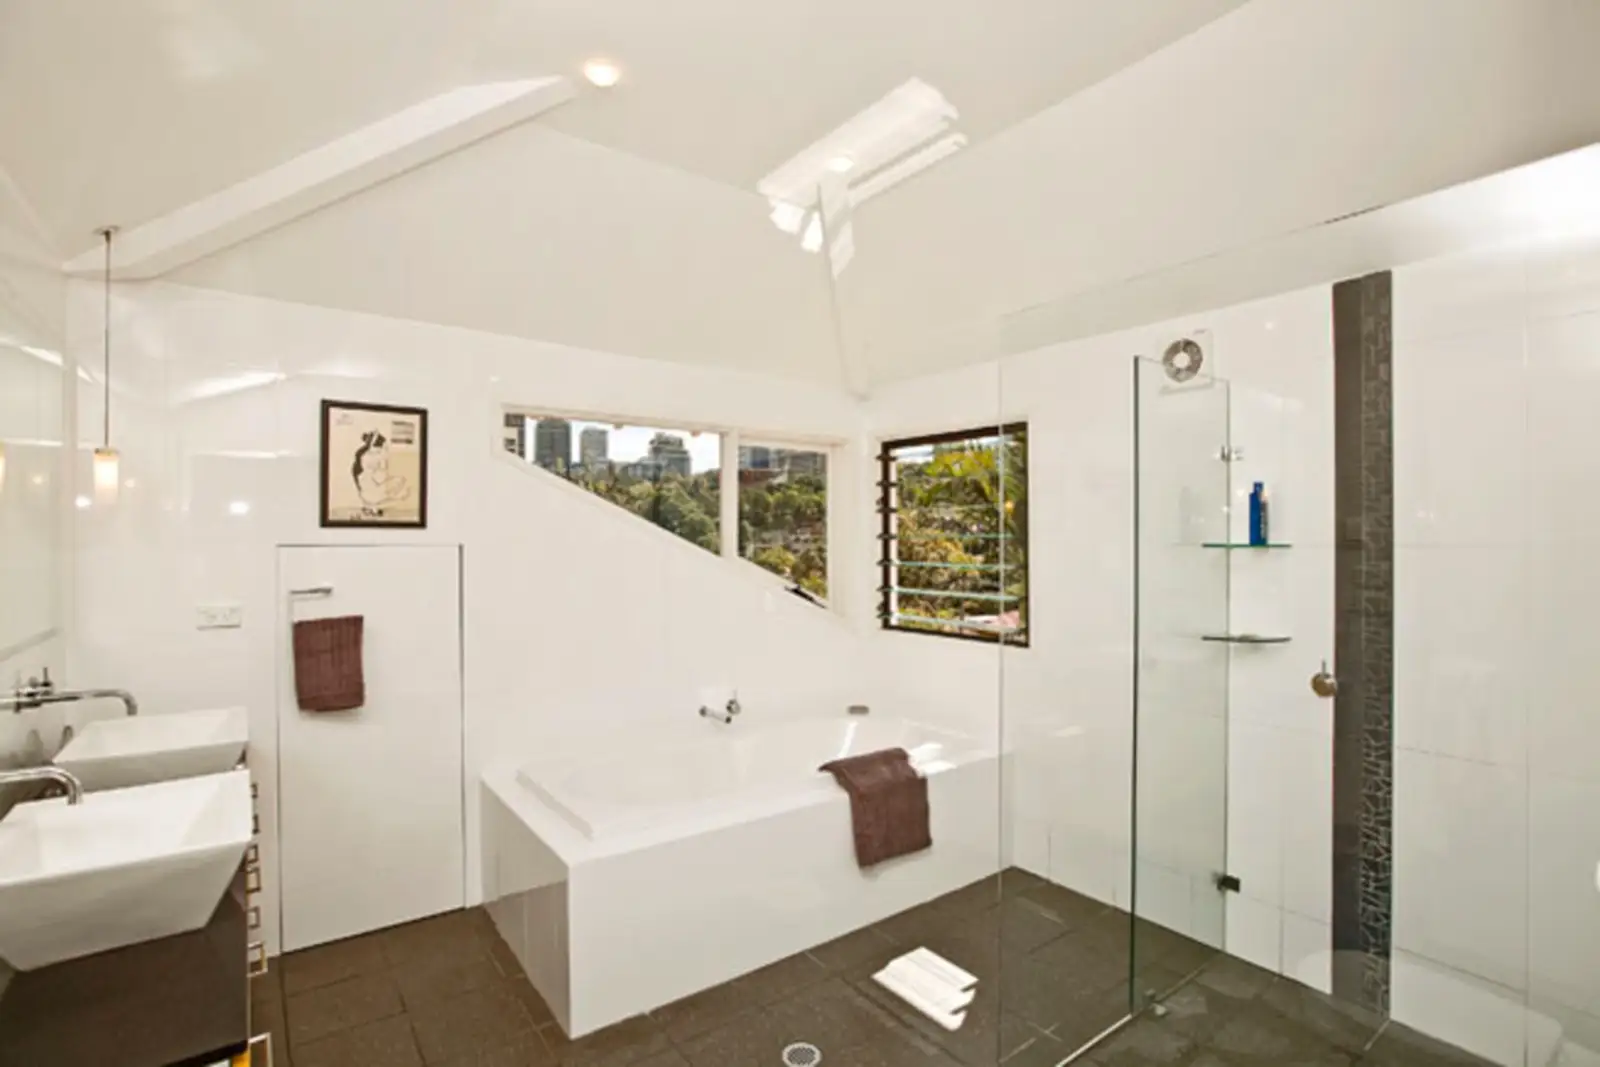 Photo #2: 17a Holdsworth Street, Neutral Bay - Sold by Sydney Sotheby's International Realty